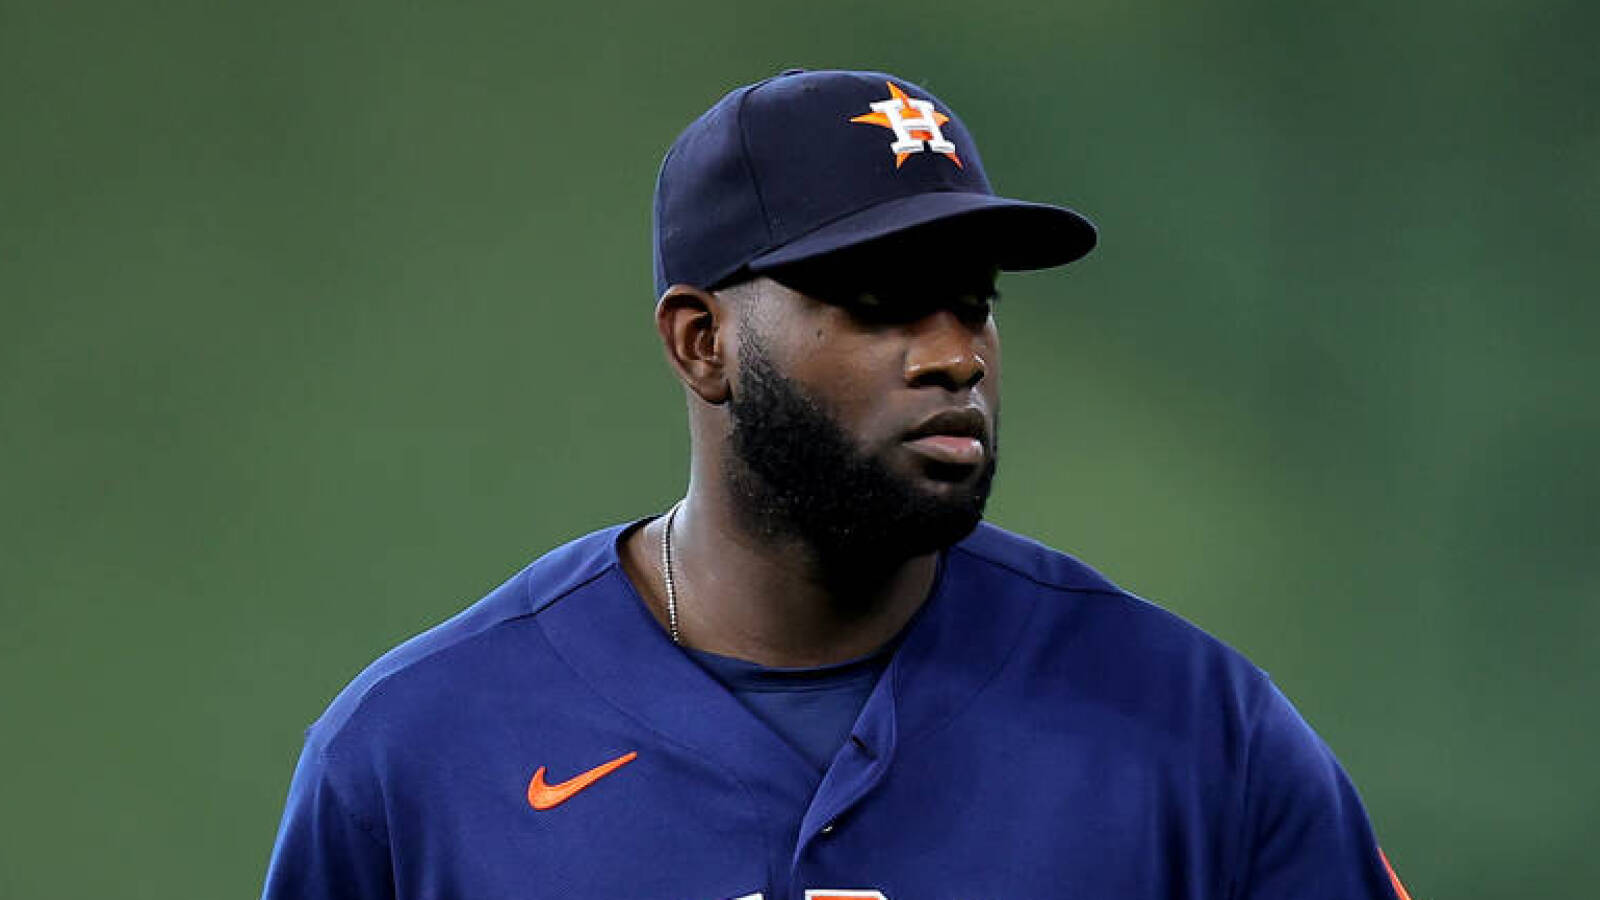 Yordan Alvarez called out due to interference by Astros fan